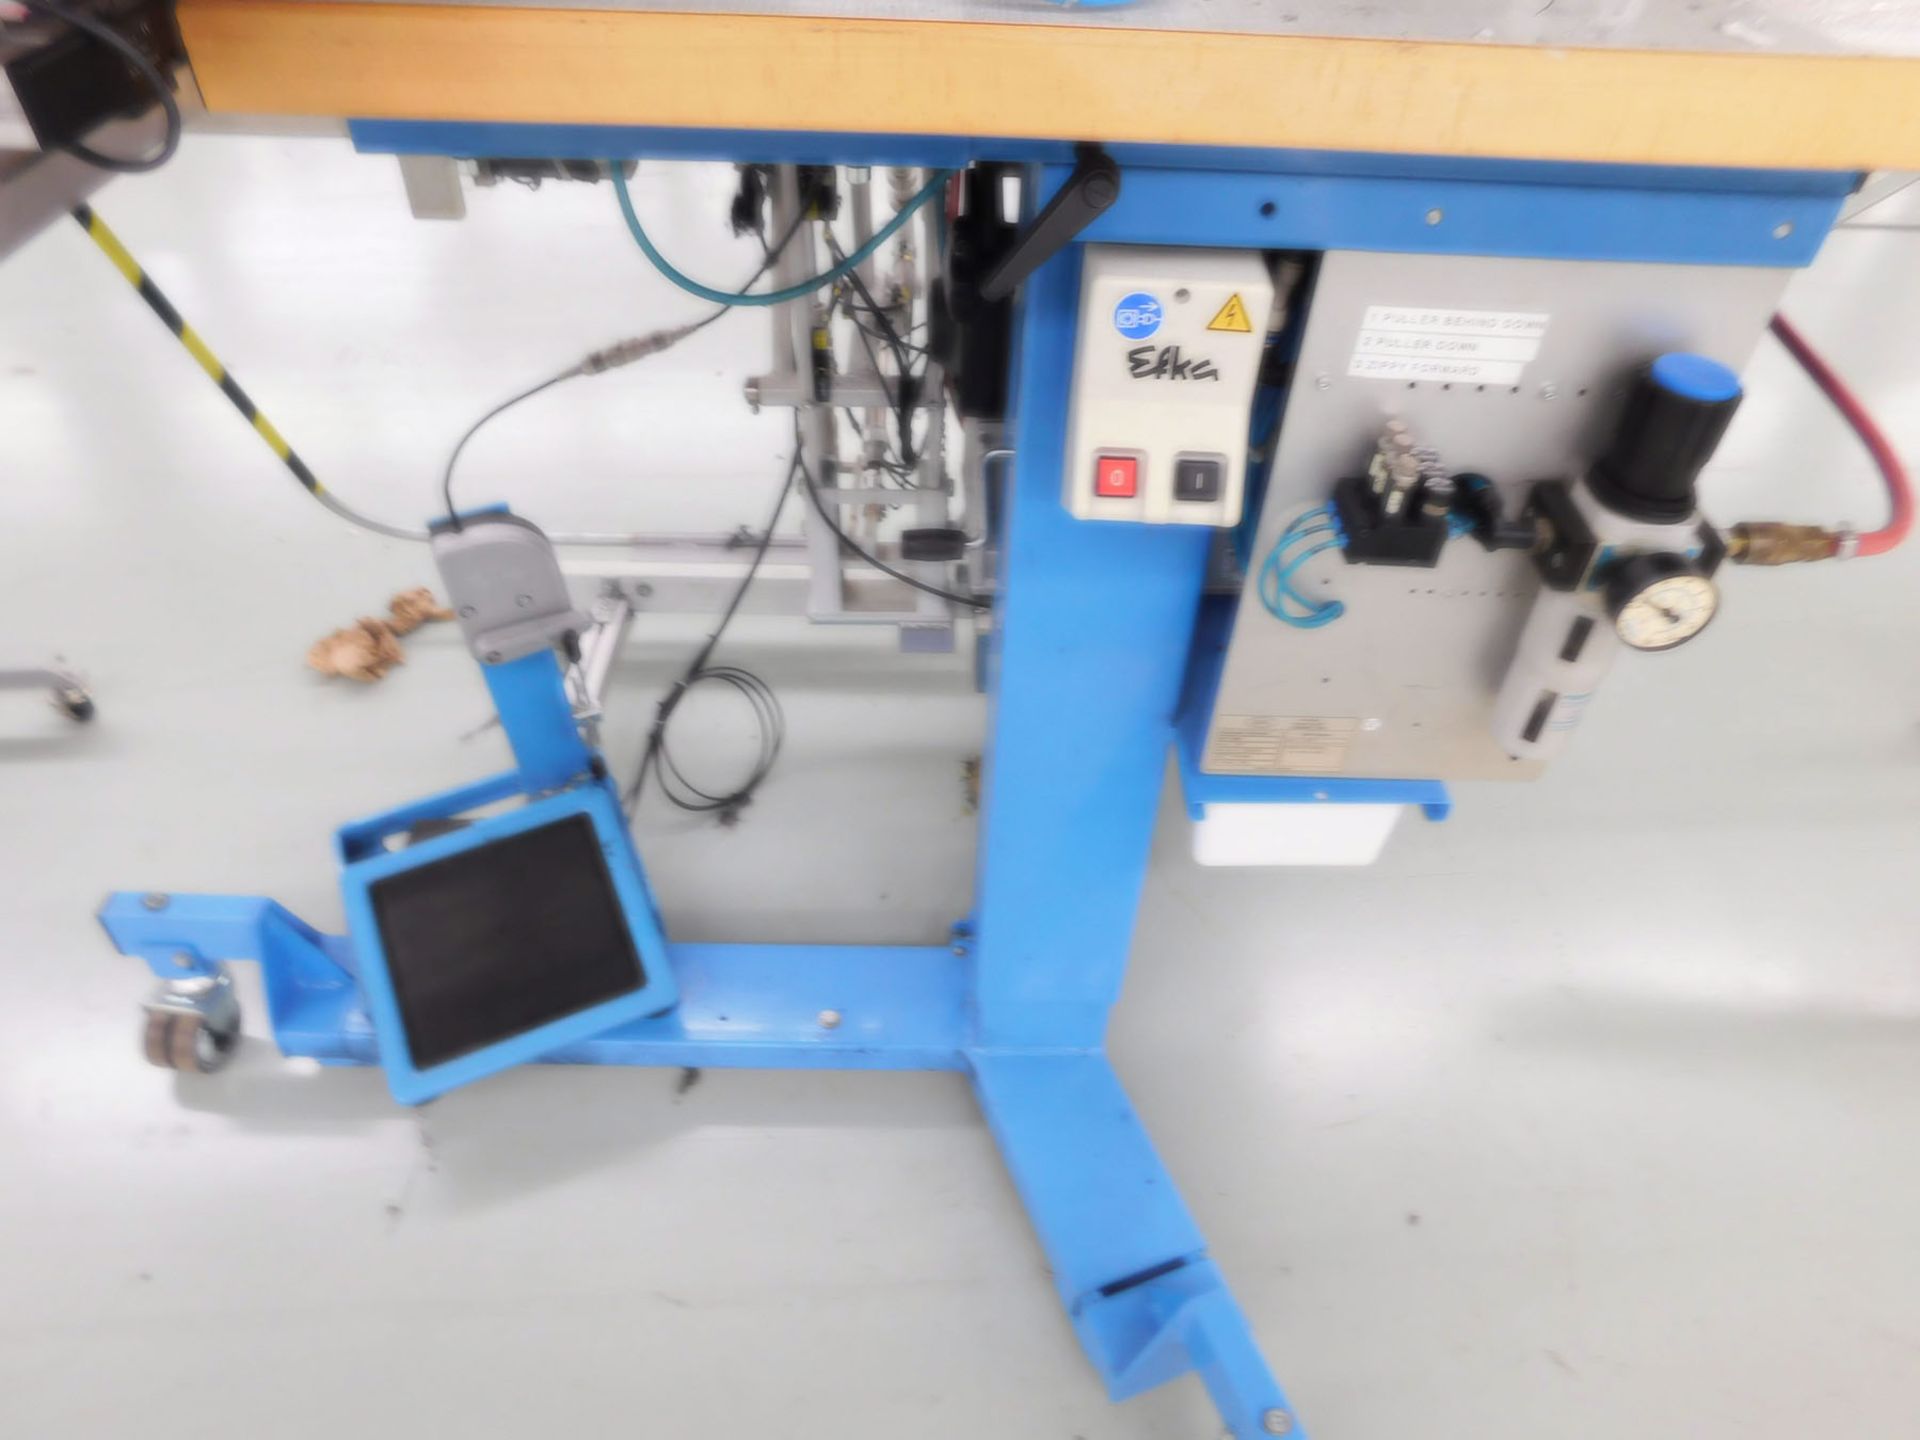 ROMBOLD SYSTEM GMBH PROGRAMMABLE SERGER, SINGLE NEEDLE, SAT-CONTROL-SYSTEM - Image 2 of 4